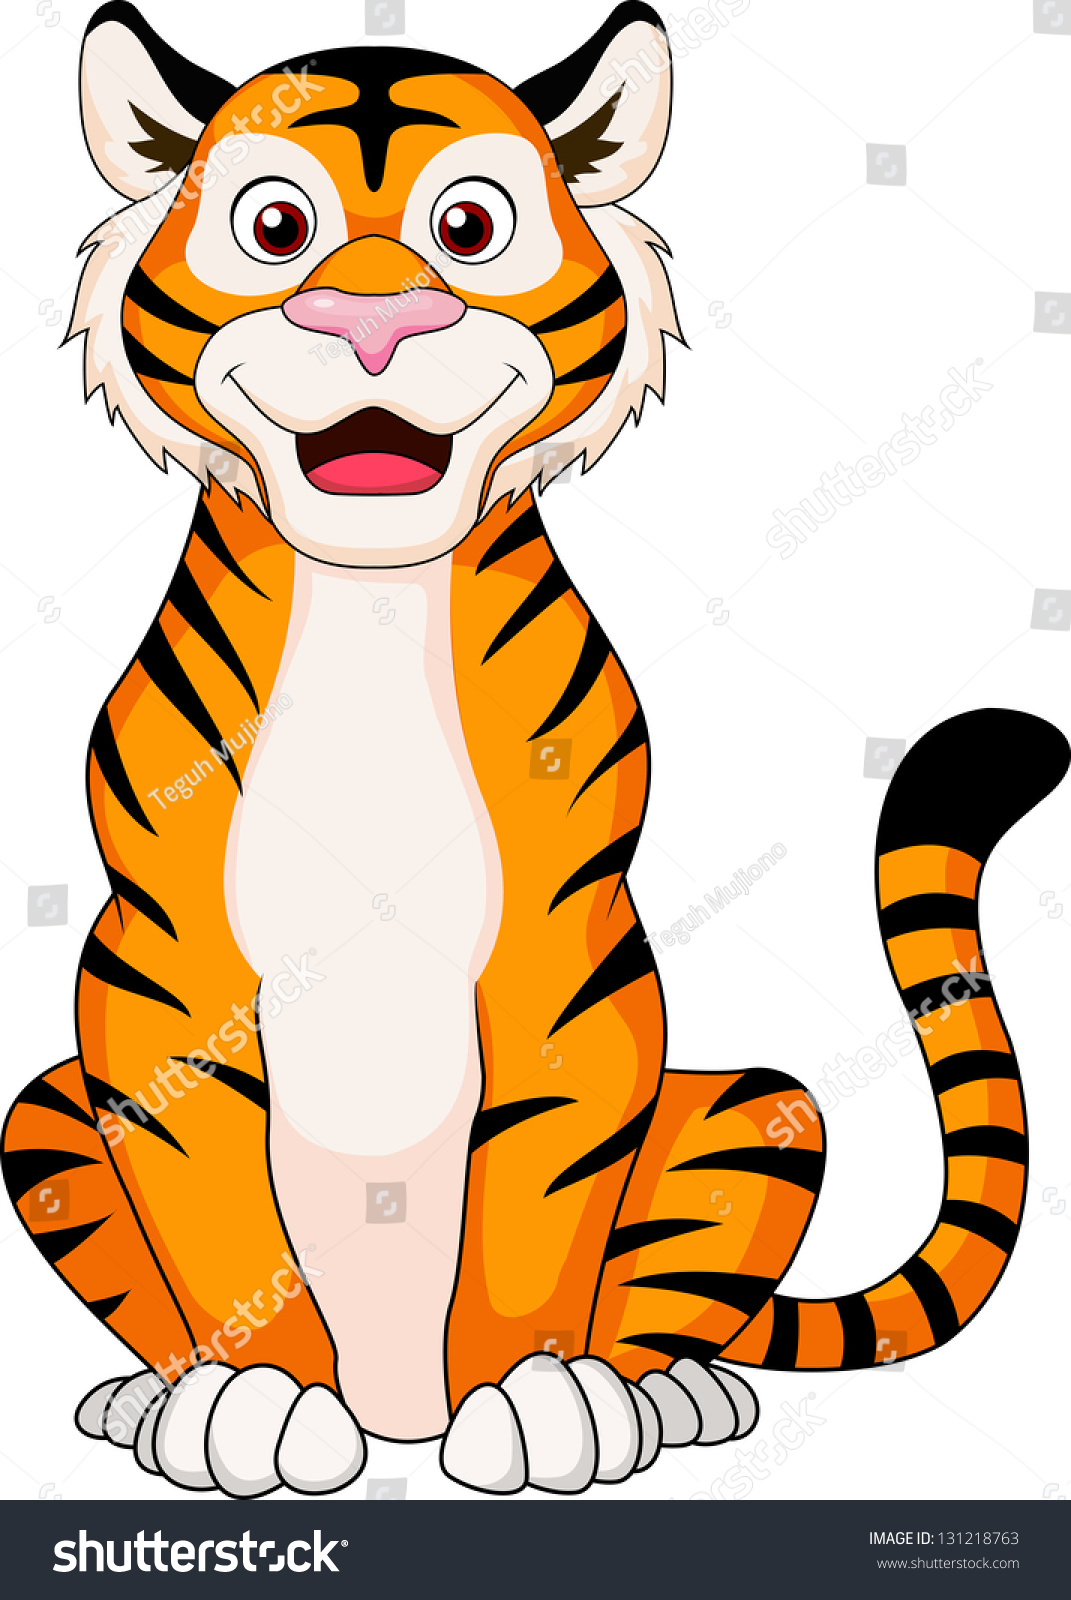 free vector tiger clipart - photo #50